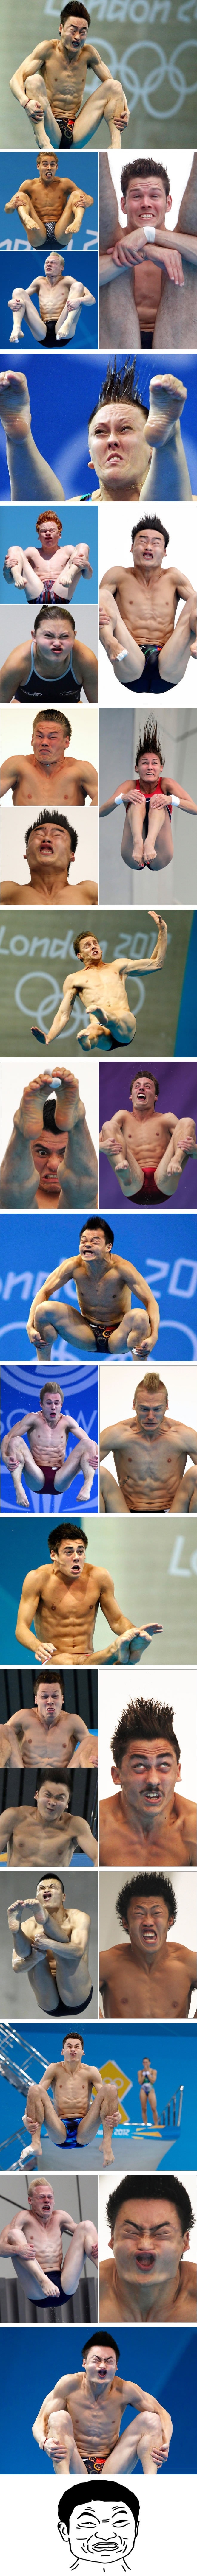 Faces of Olympic divers